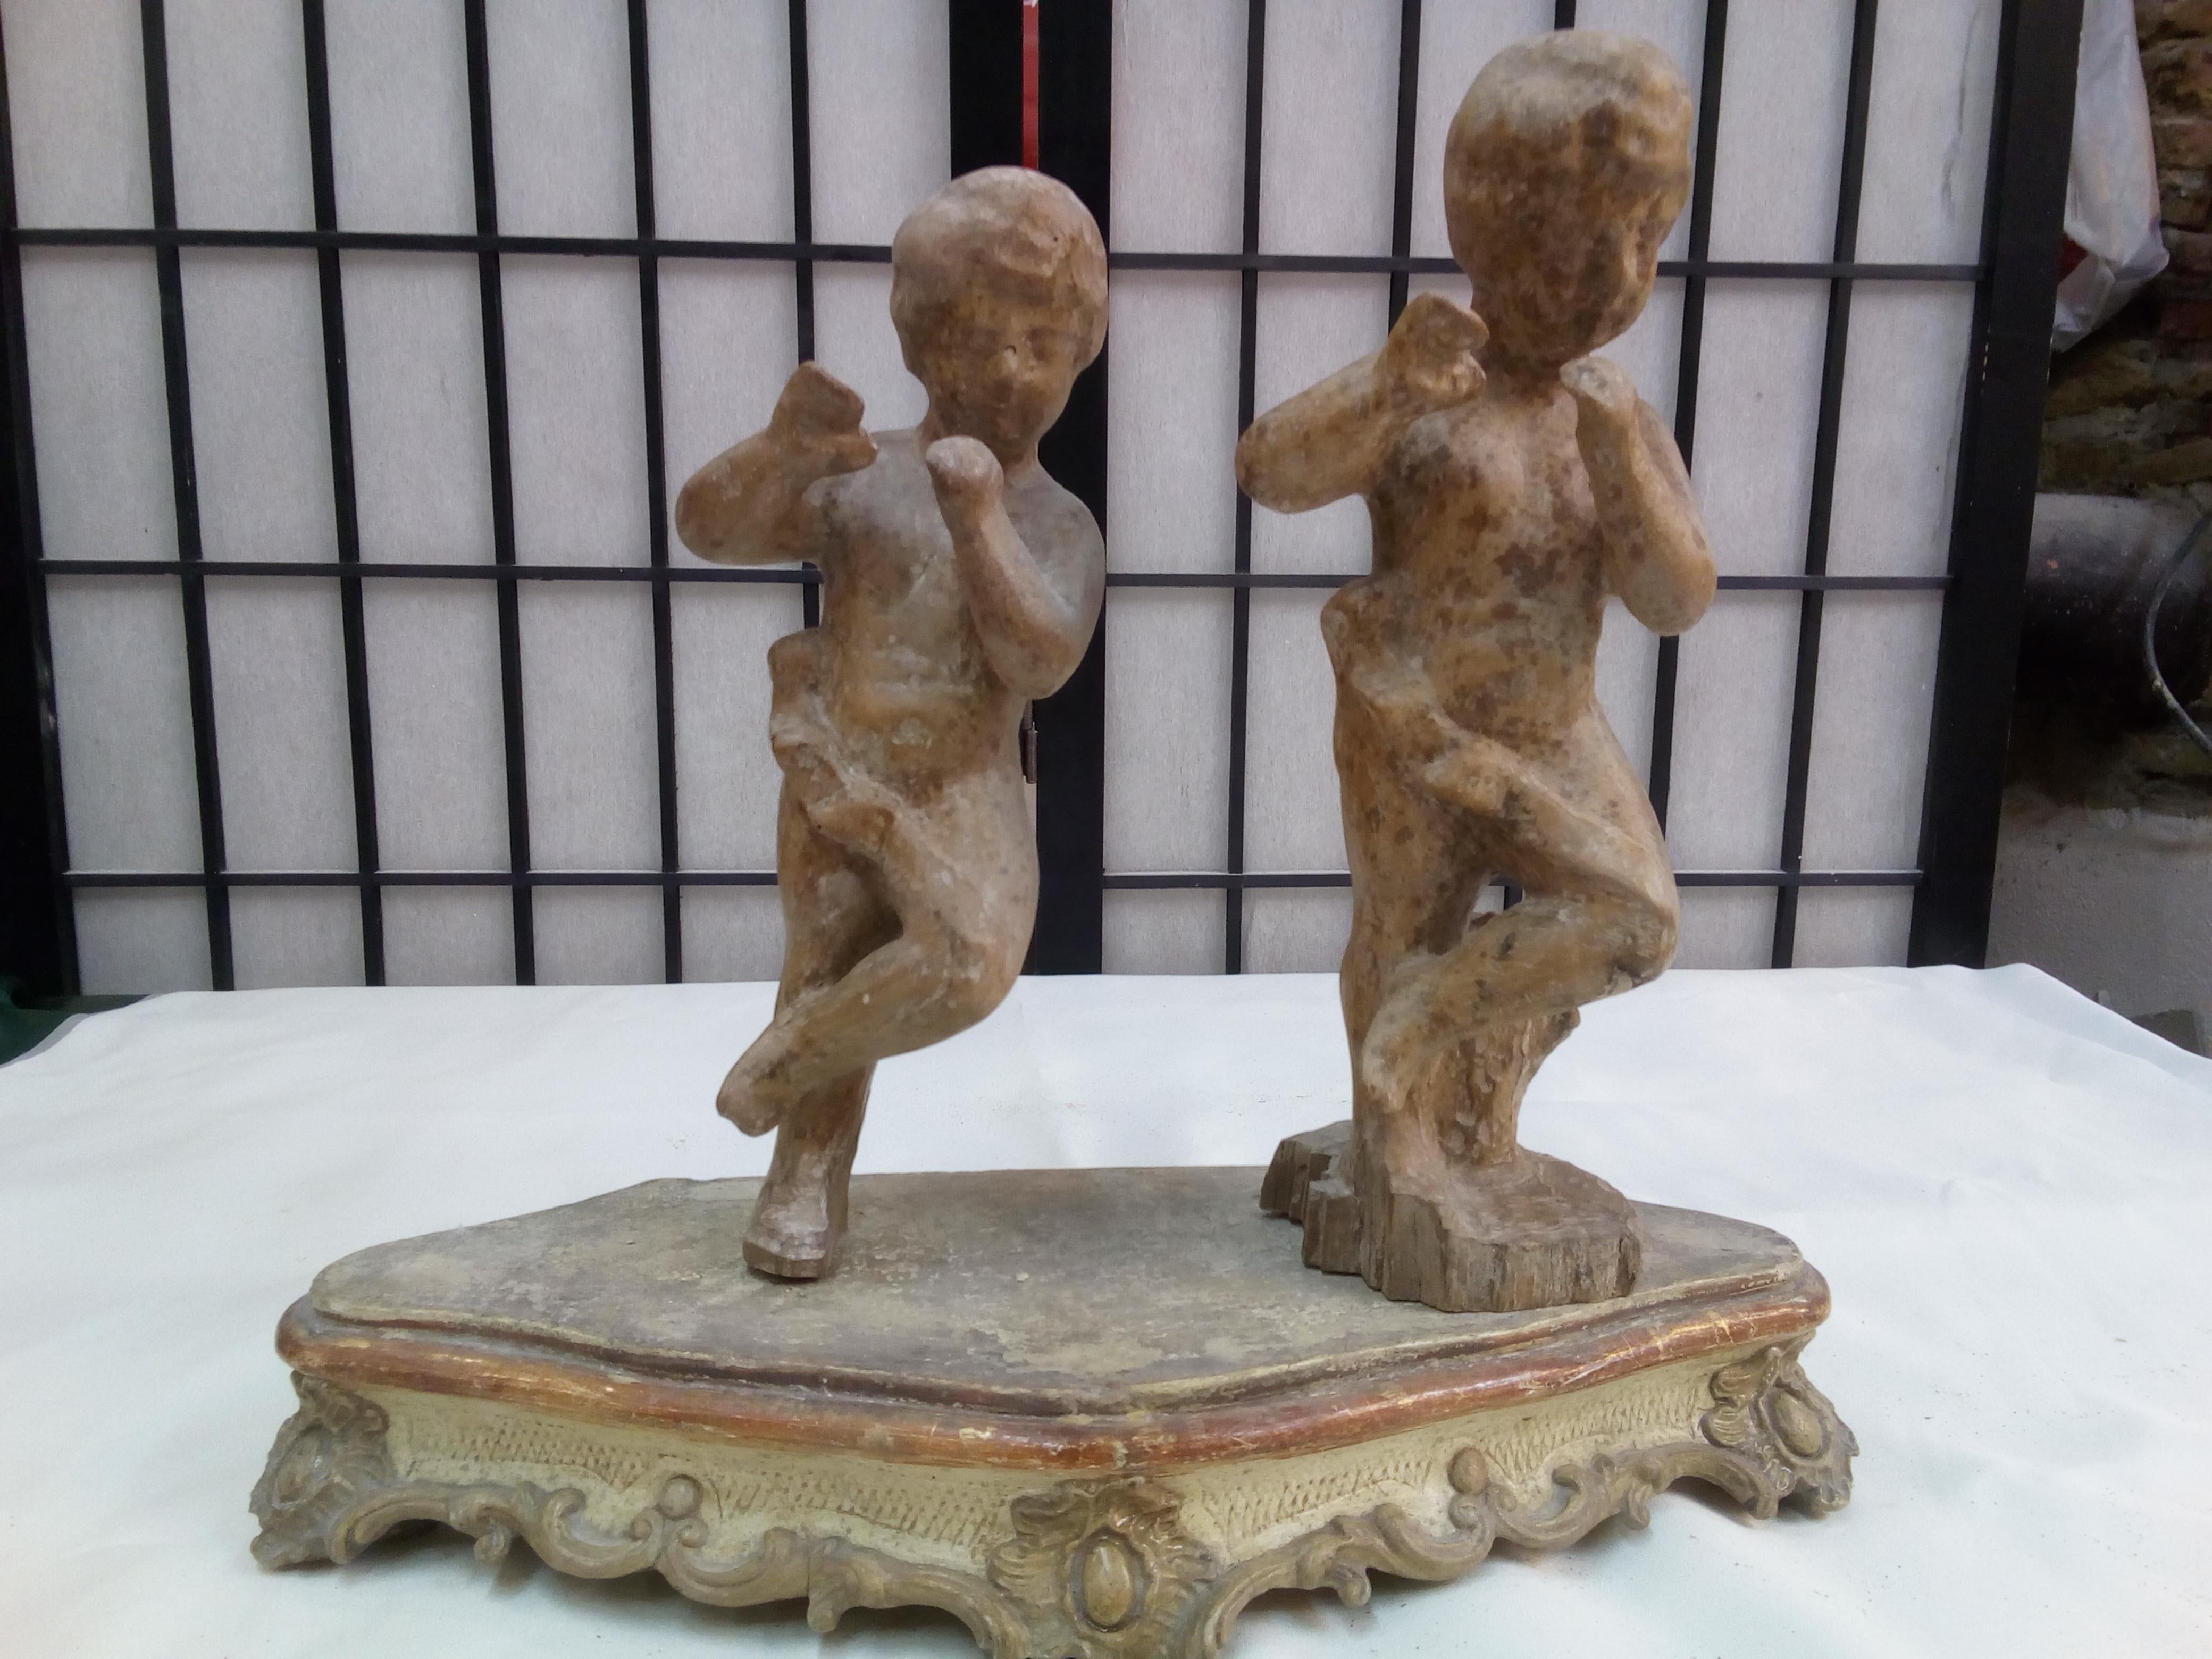 A couple of hand-carved Musicians in wood inserted into a non-coeval base.
The subjects represent two dancing children playing the flute. 
This sculpture piece is of perfect size to be a desk accessory, measuring 11x31x26 cm (4x12x10 inches).

This